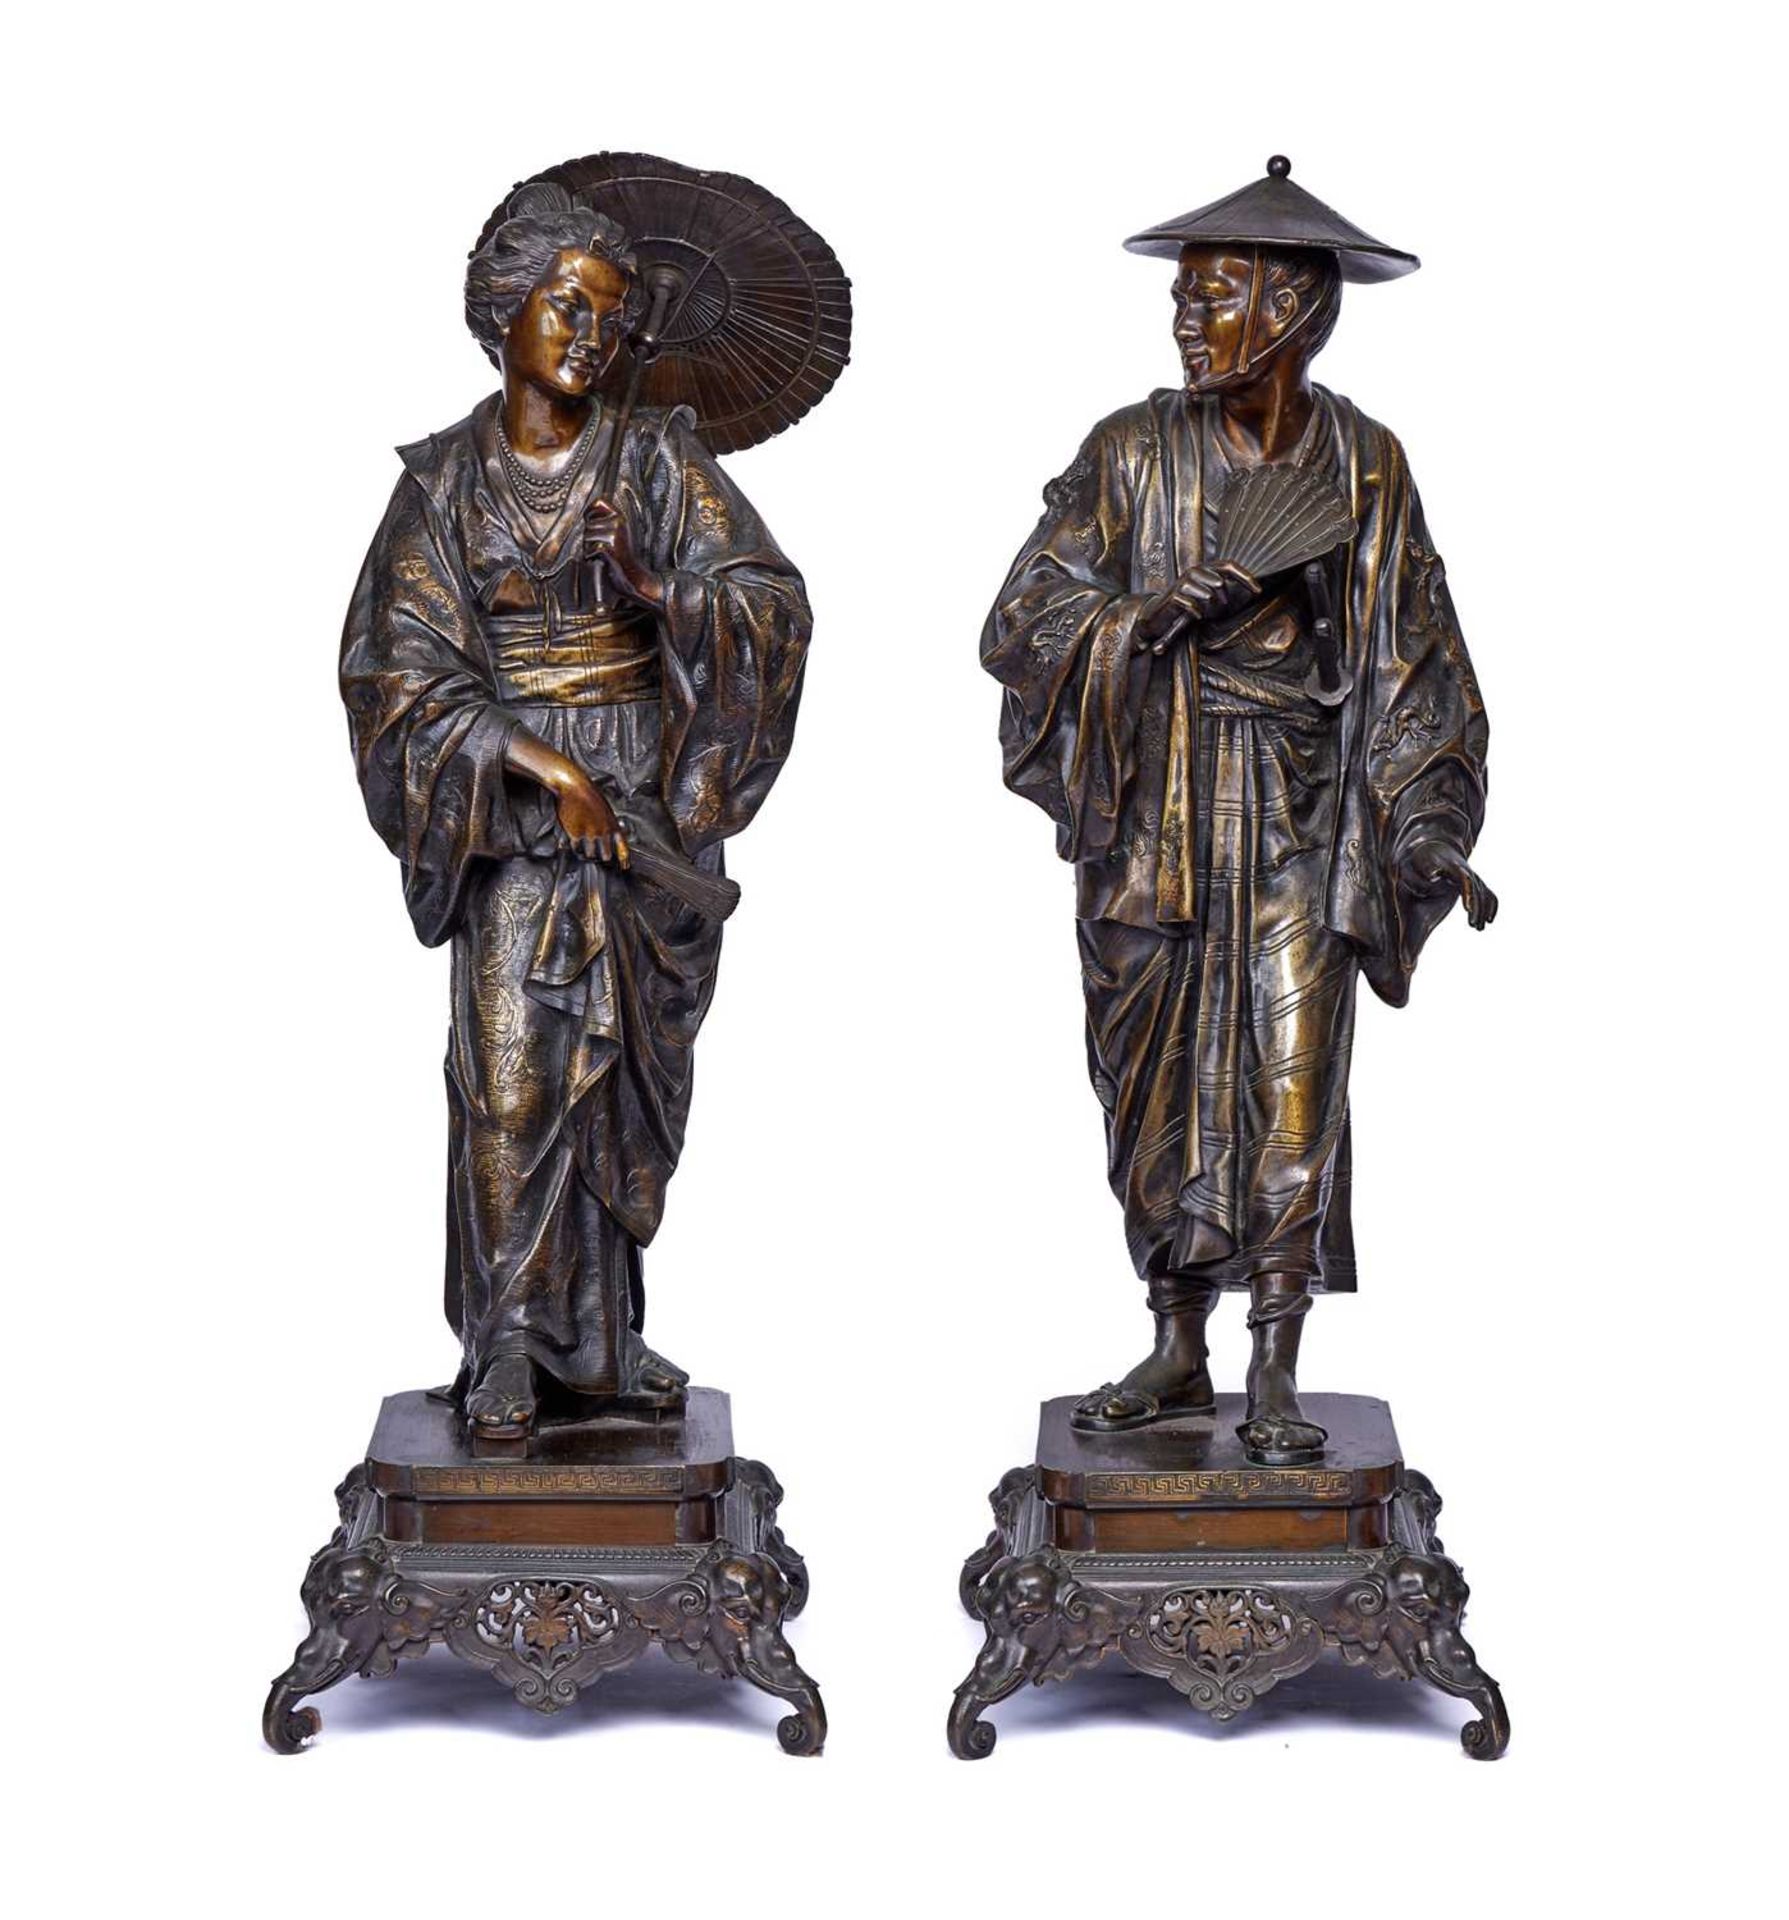 A FINE PAIR OF 19TH CENTURY FRENCH BRONZE 'JAPONISME' FIGURES